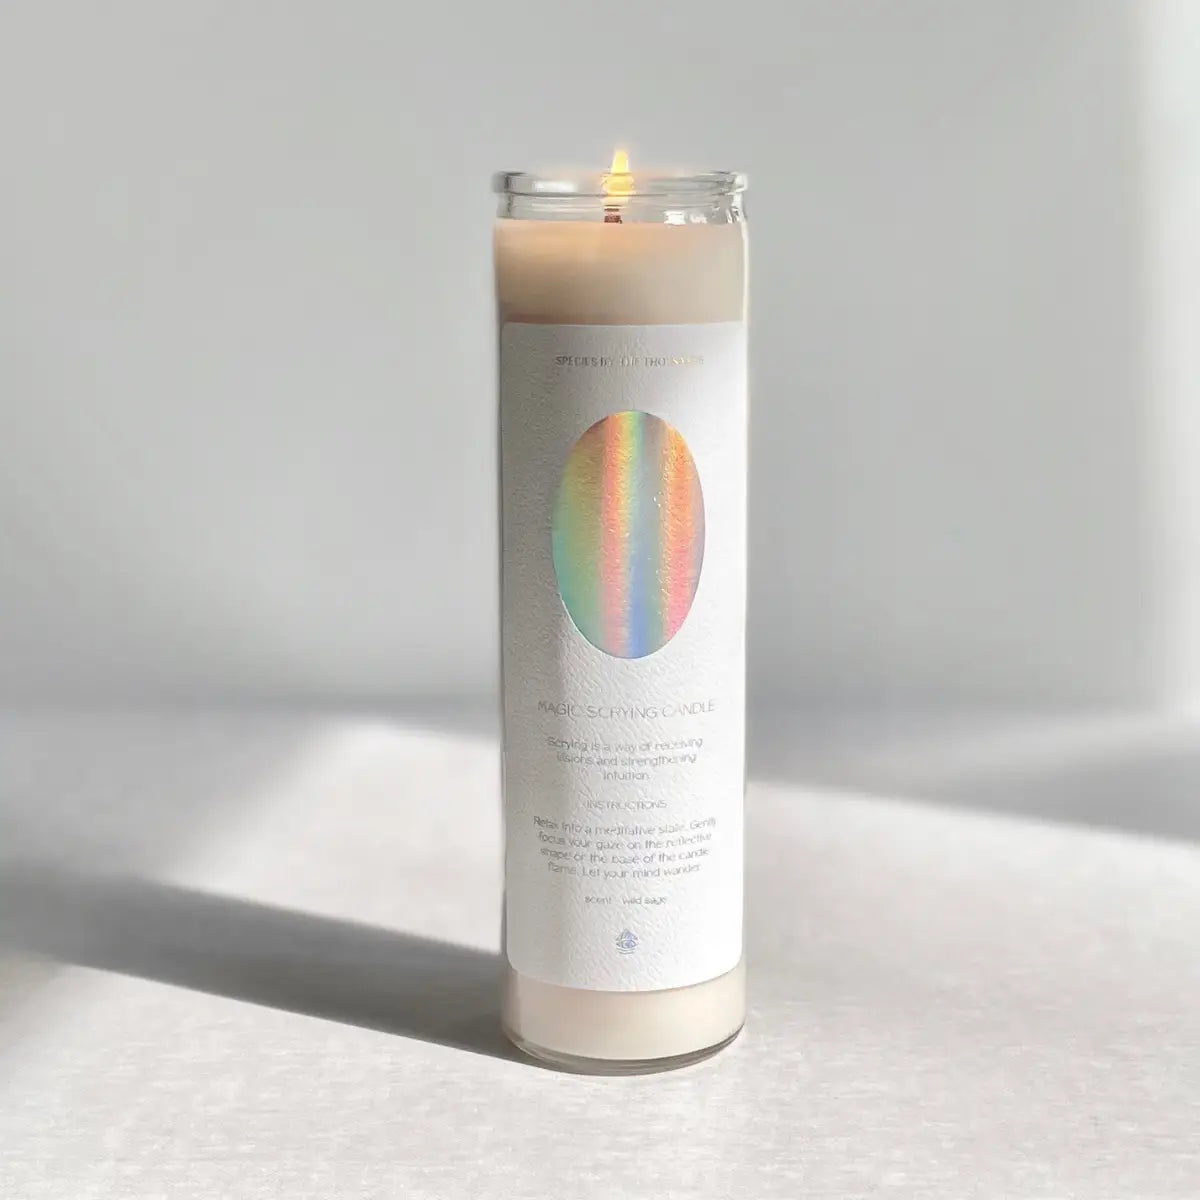 Species by the Thousands - Magic Scrying Handcrafted Soy Candle